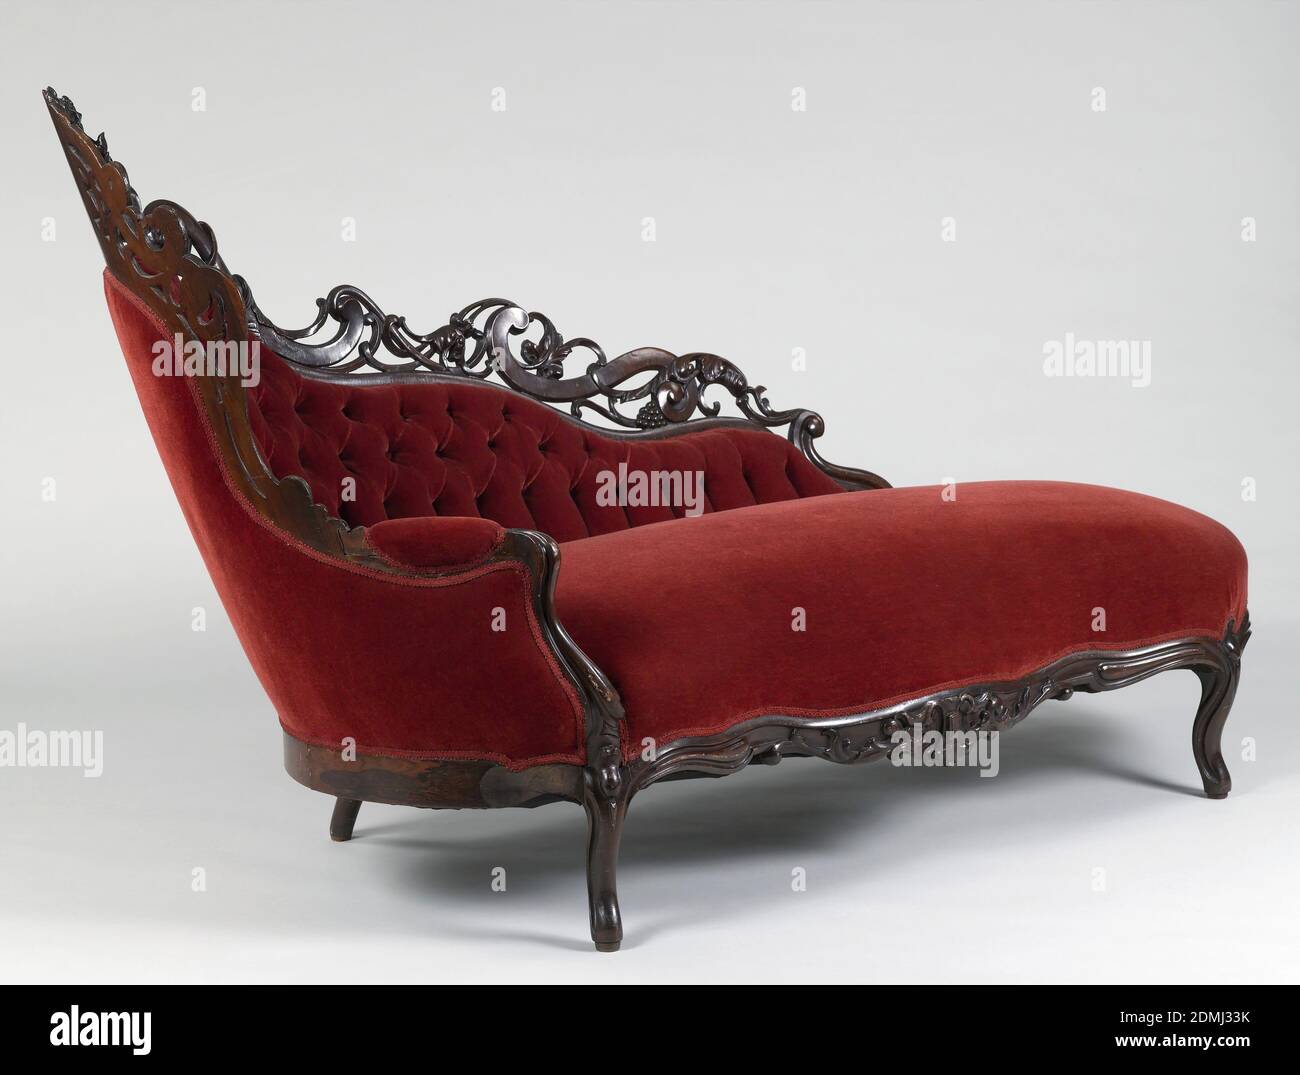 Chaise, Rosewood veneer, oak (frame), velvet upholstery, Serpentine front, rounded ends, cabriole legs fitted with castors; back of serpentine profile, raised high in circle at one end and crowned with pierced cresting of laminated wood in scrolls and acanthus shoots. Cluster of flowers in relief at center of arched back, and another at center of apron. Upholstered in contemporaneous machine-woven fancy compound satin, tufted on back., New York, USA, 1860–70, furniture, Decorative Arts, Chaise Stock Photo